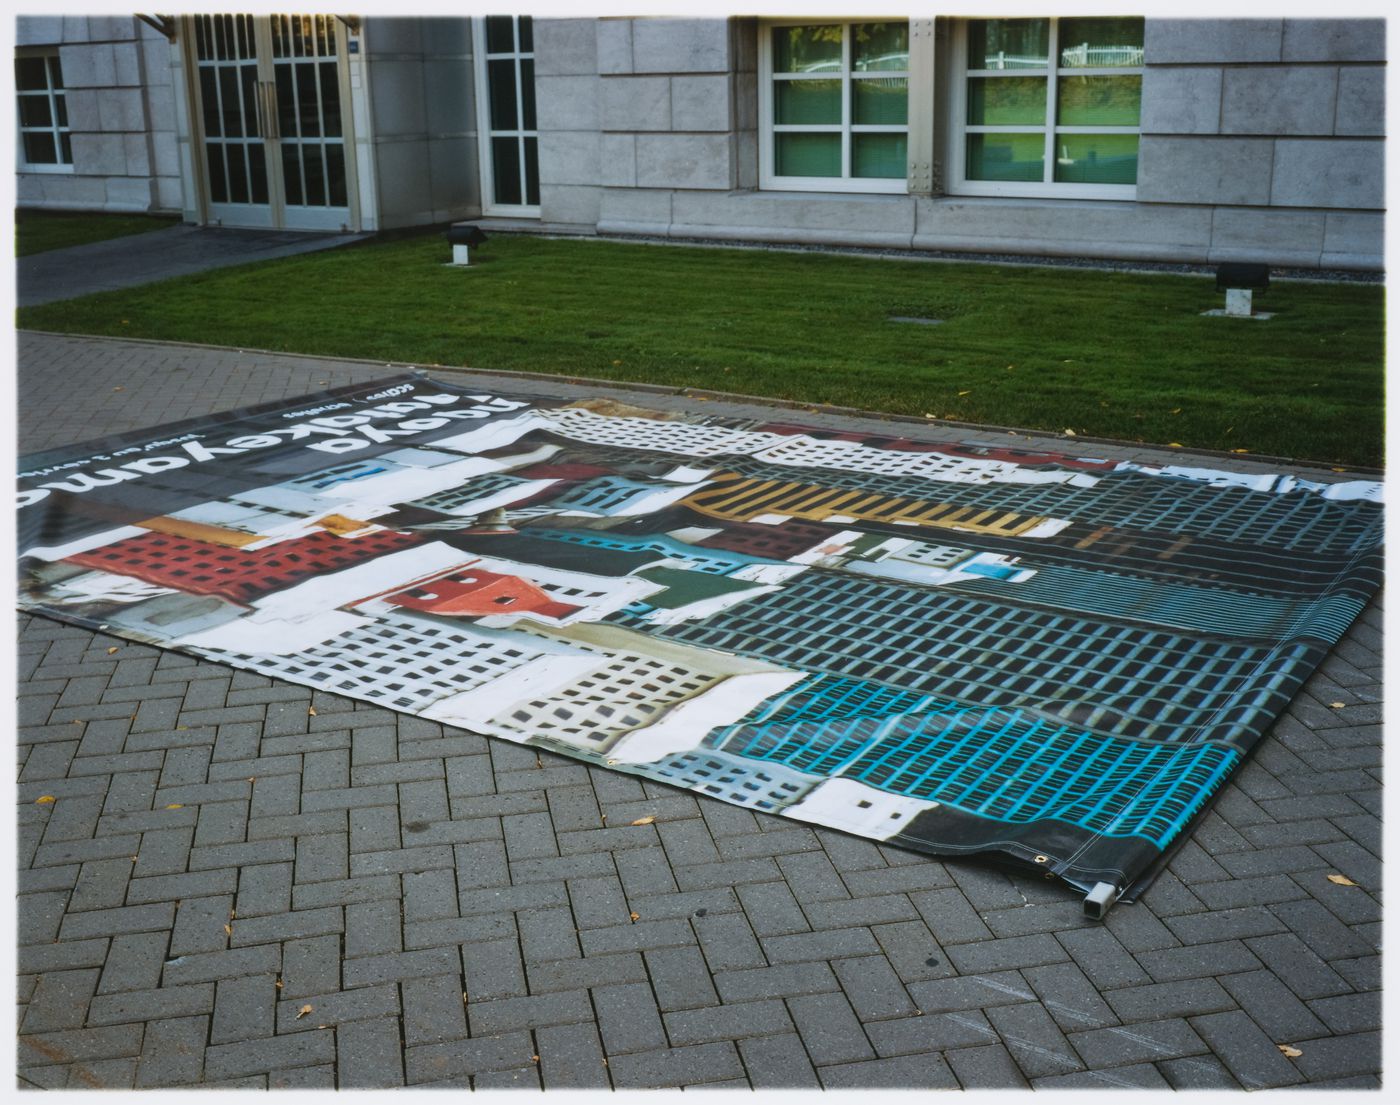 View of  "Naoya Hatakeyama: Scales" exhibition banner prior to its installation on the main façade of the Canadian Centre for Architecture, Montréal